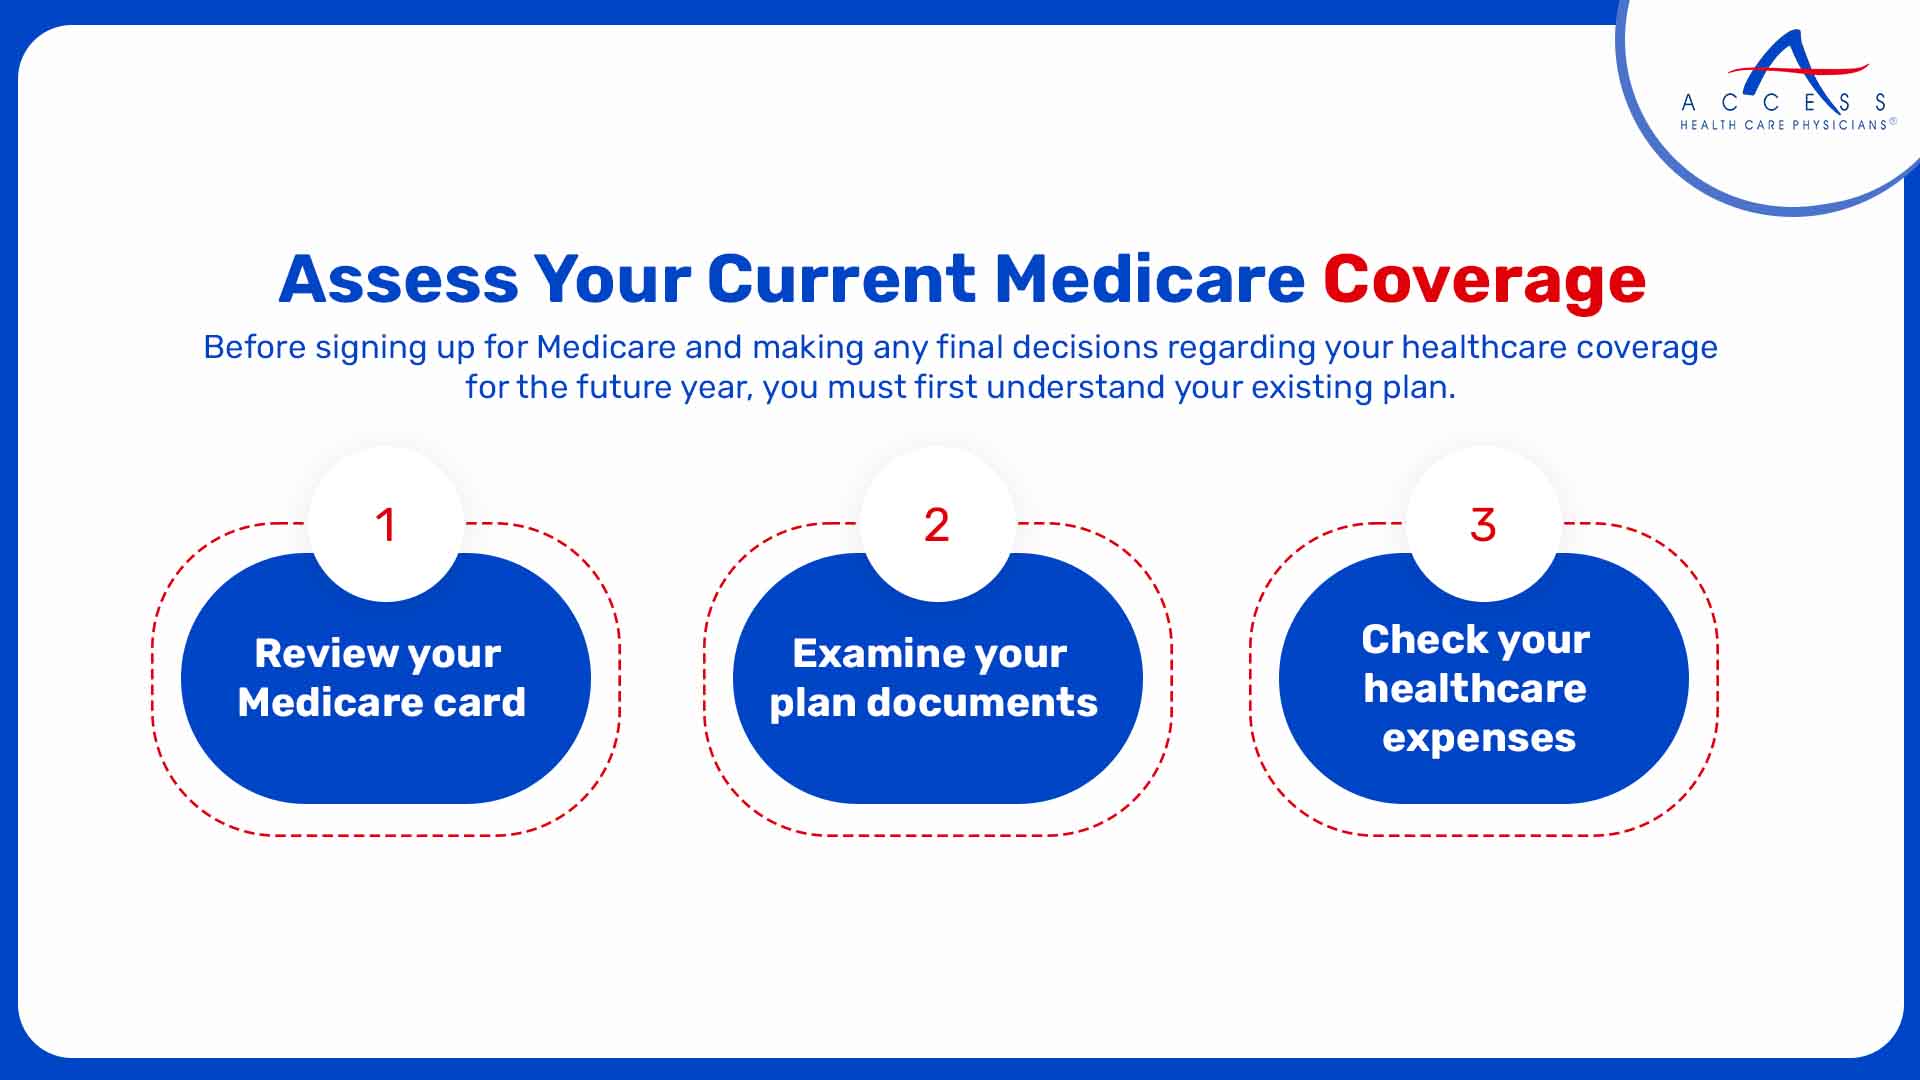 Assess Your Current Medicare Coverage